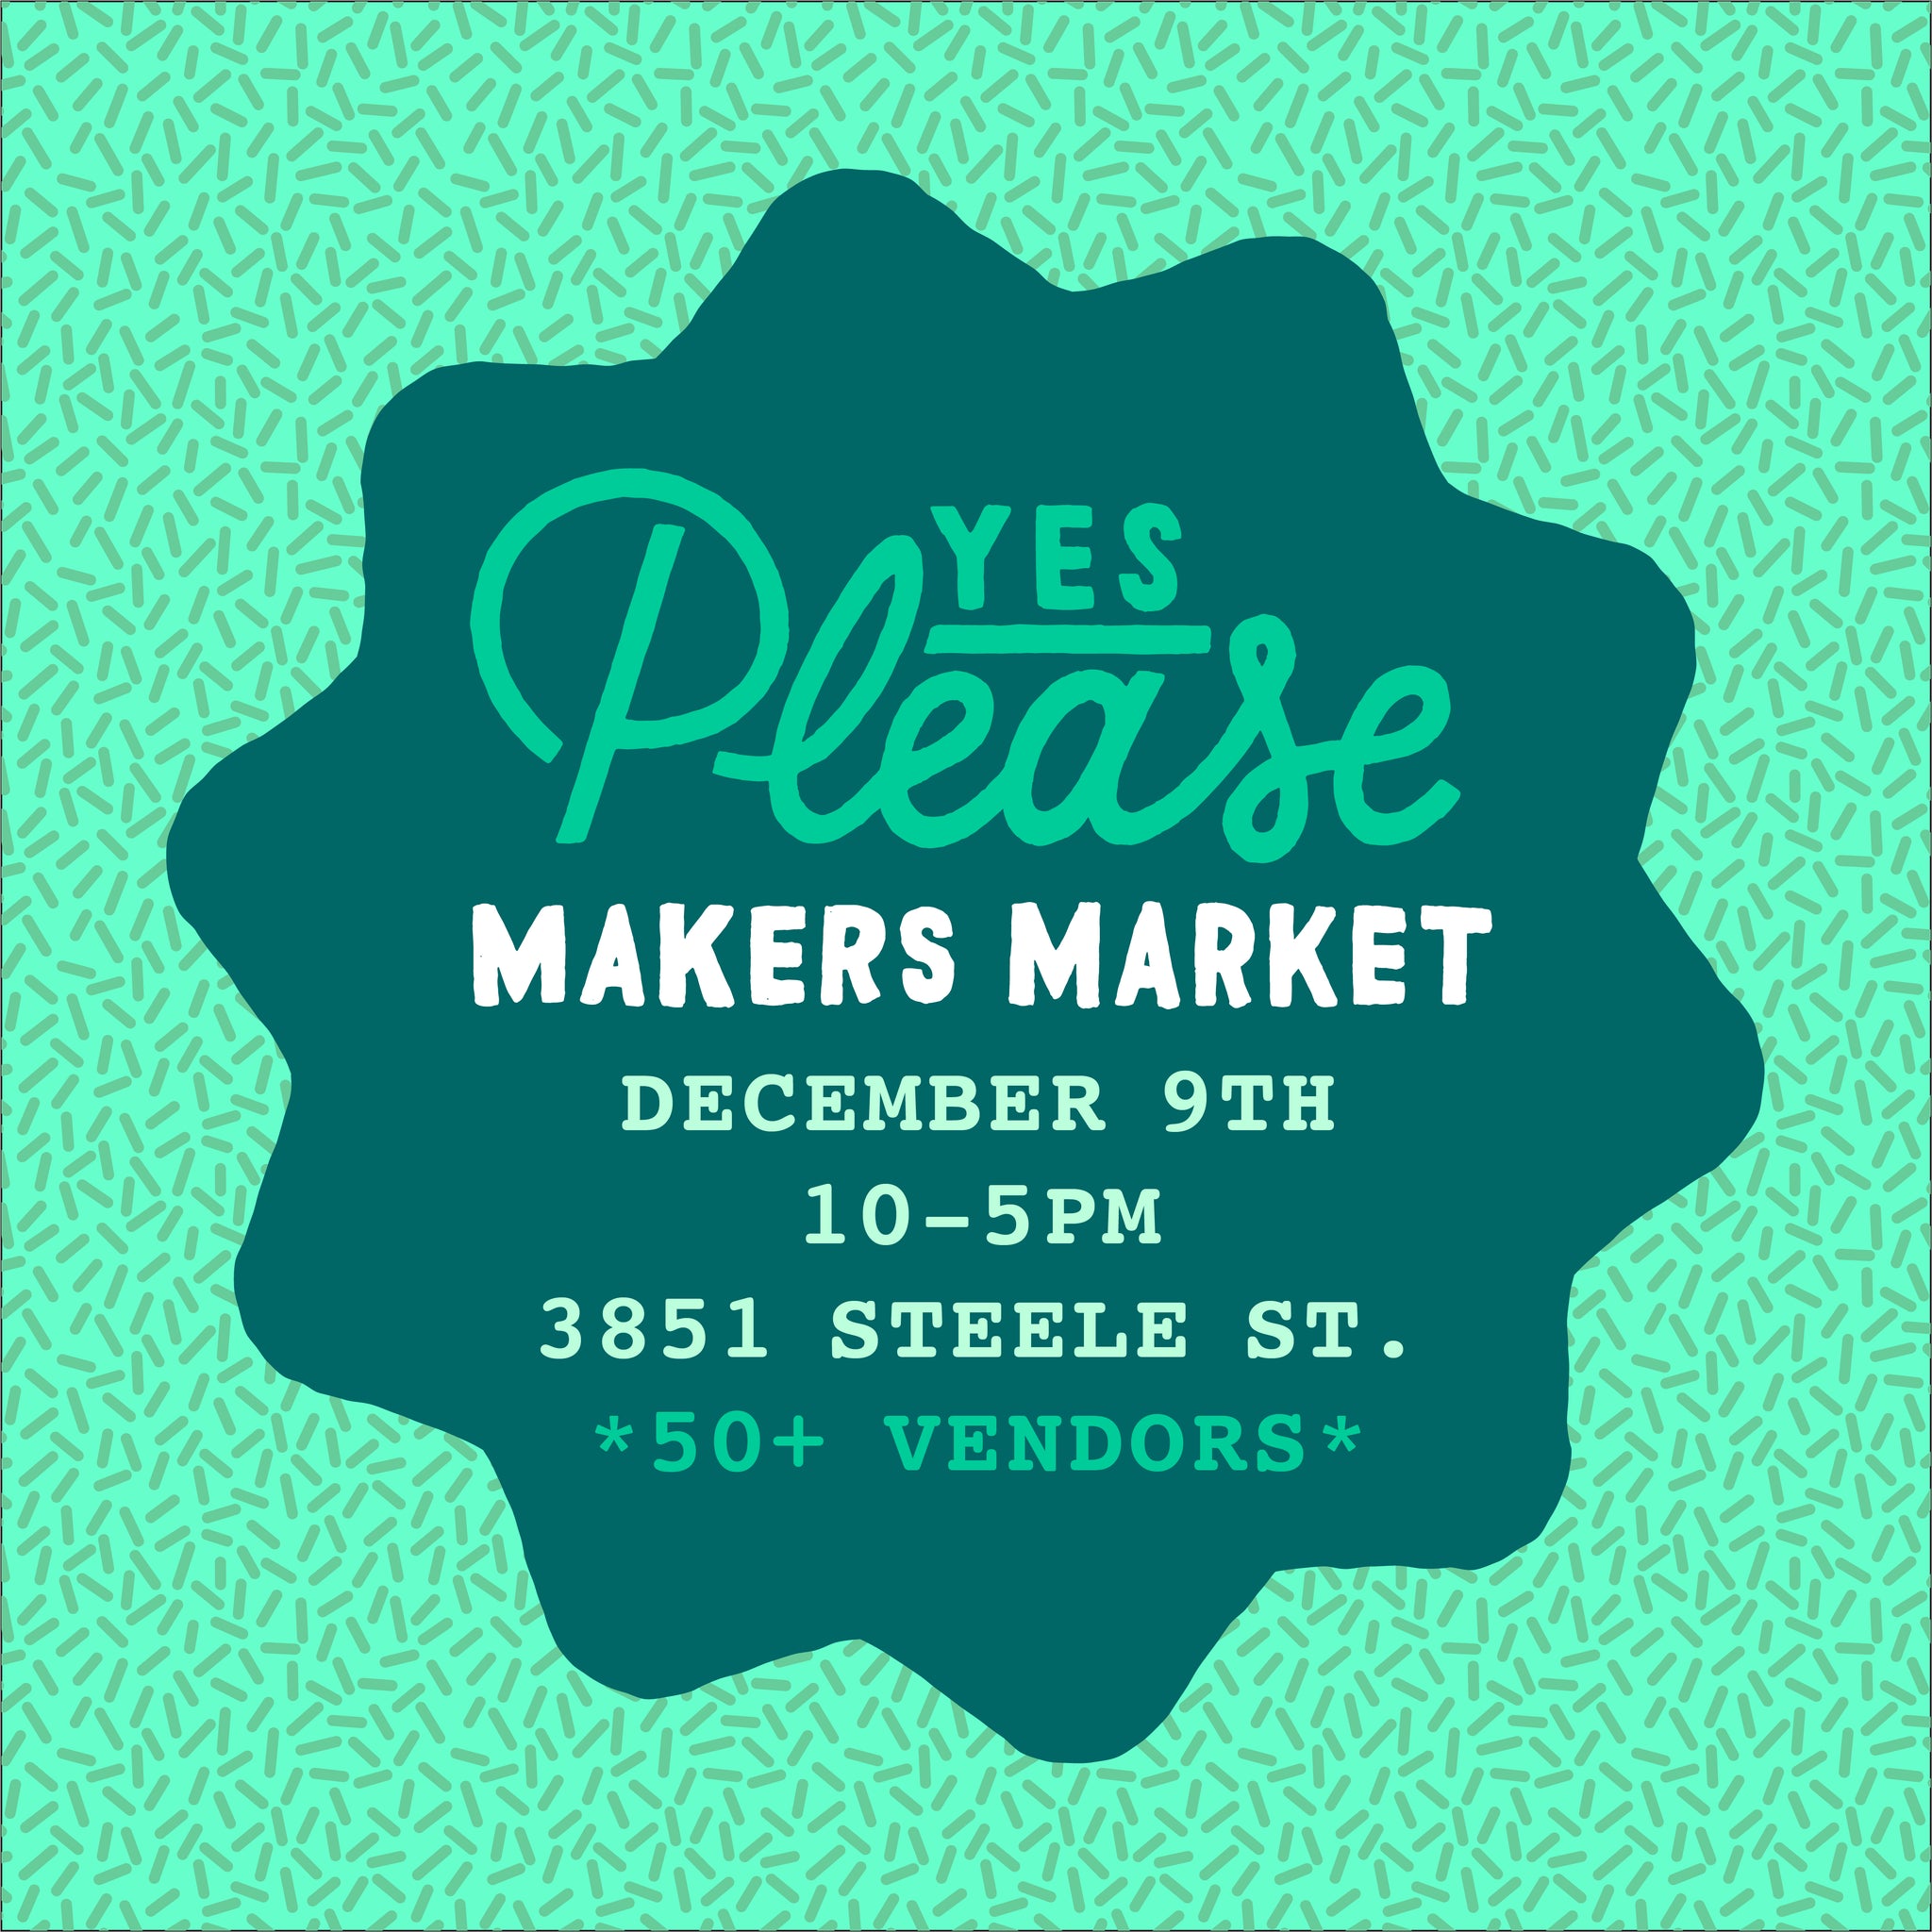 Yes Please Makers Market